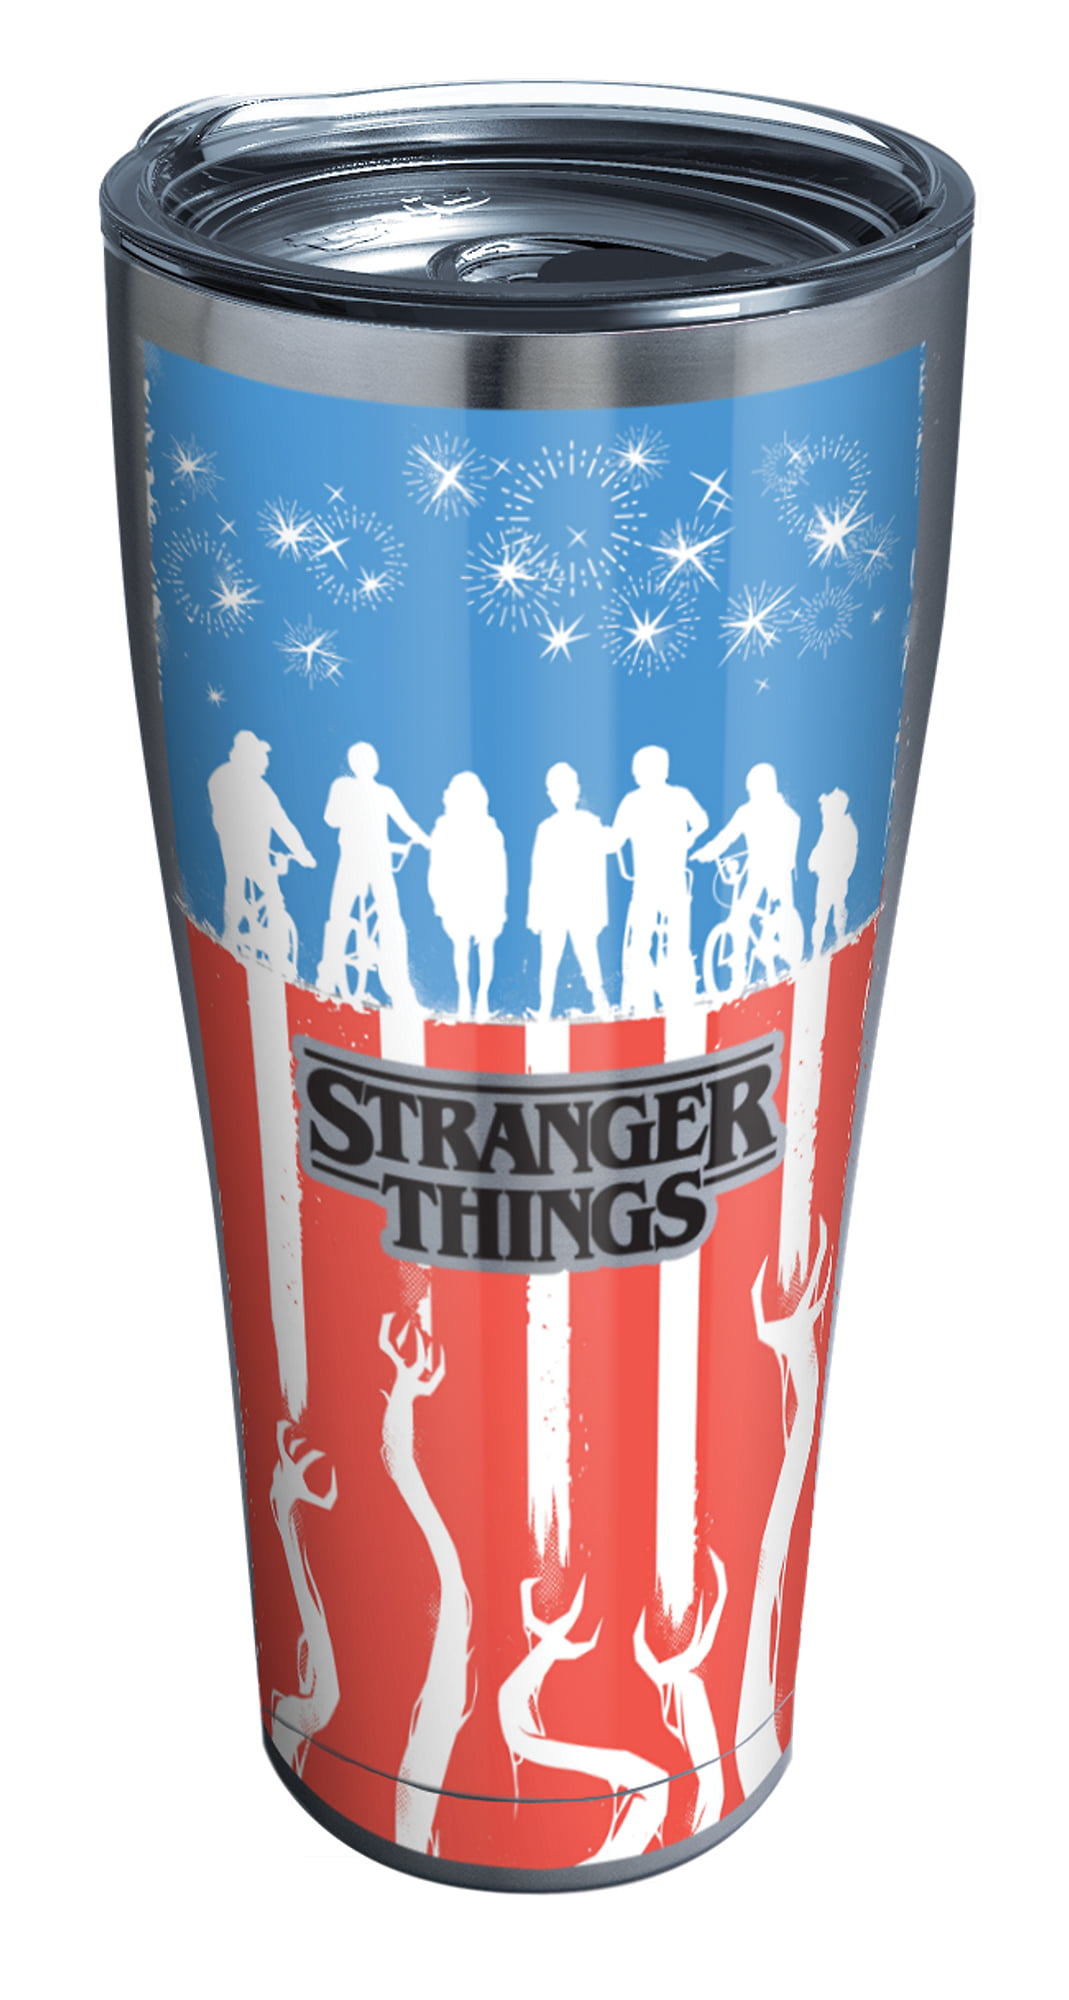 Tervis Triple Walled Stranger Things Insulated Tumbler Cup Keeps Drinks  Cold & Hot, 30oz - Stainless Steel, Season 3 Fireworks